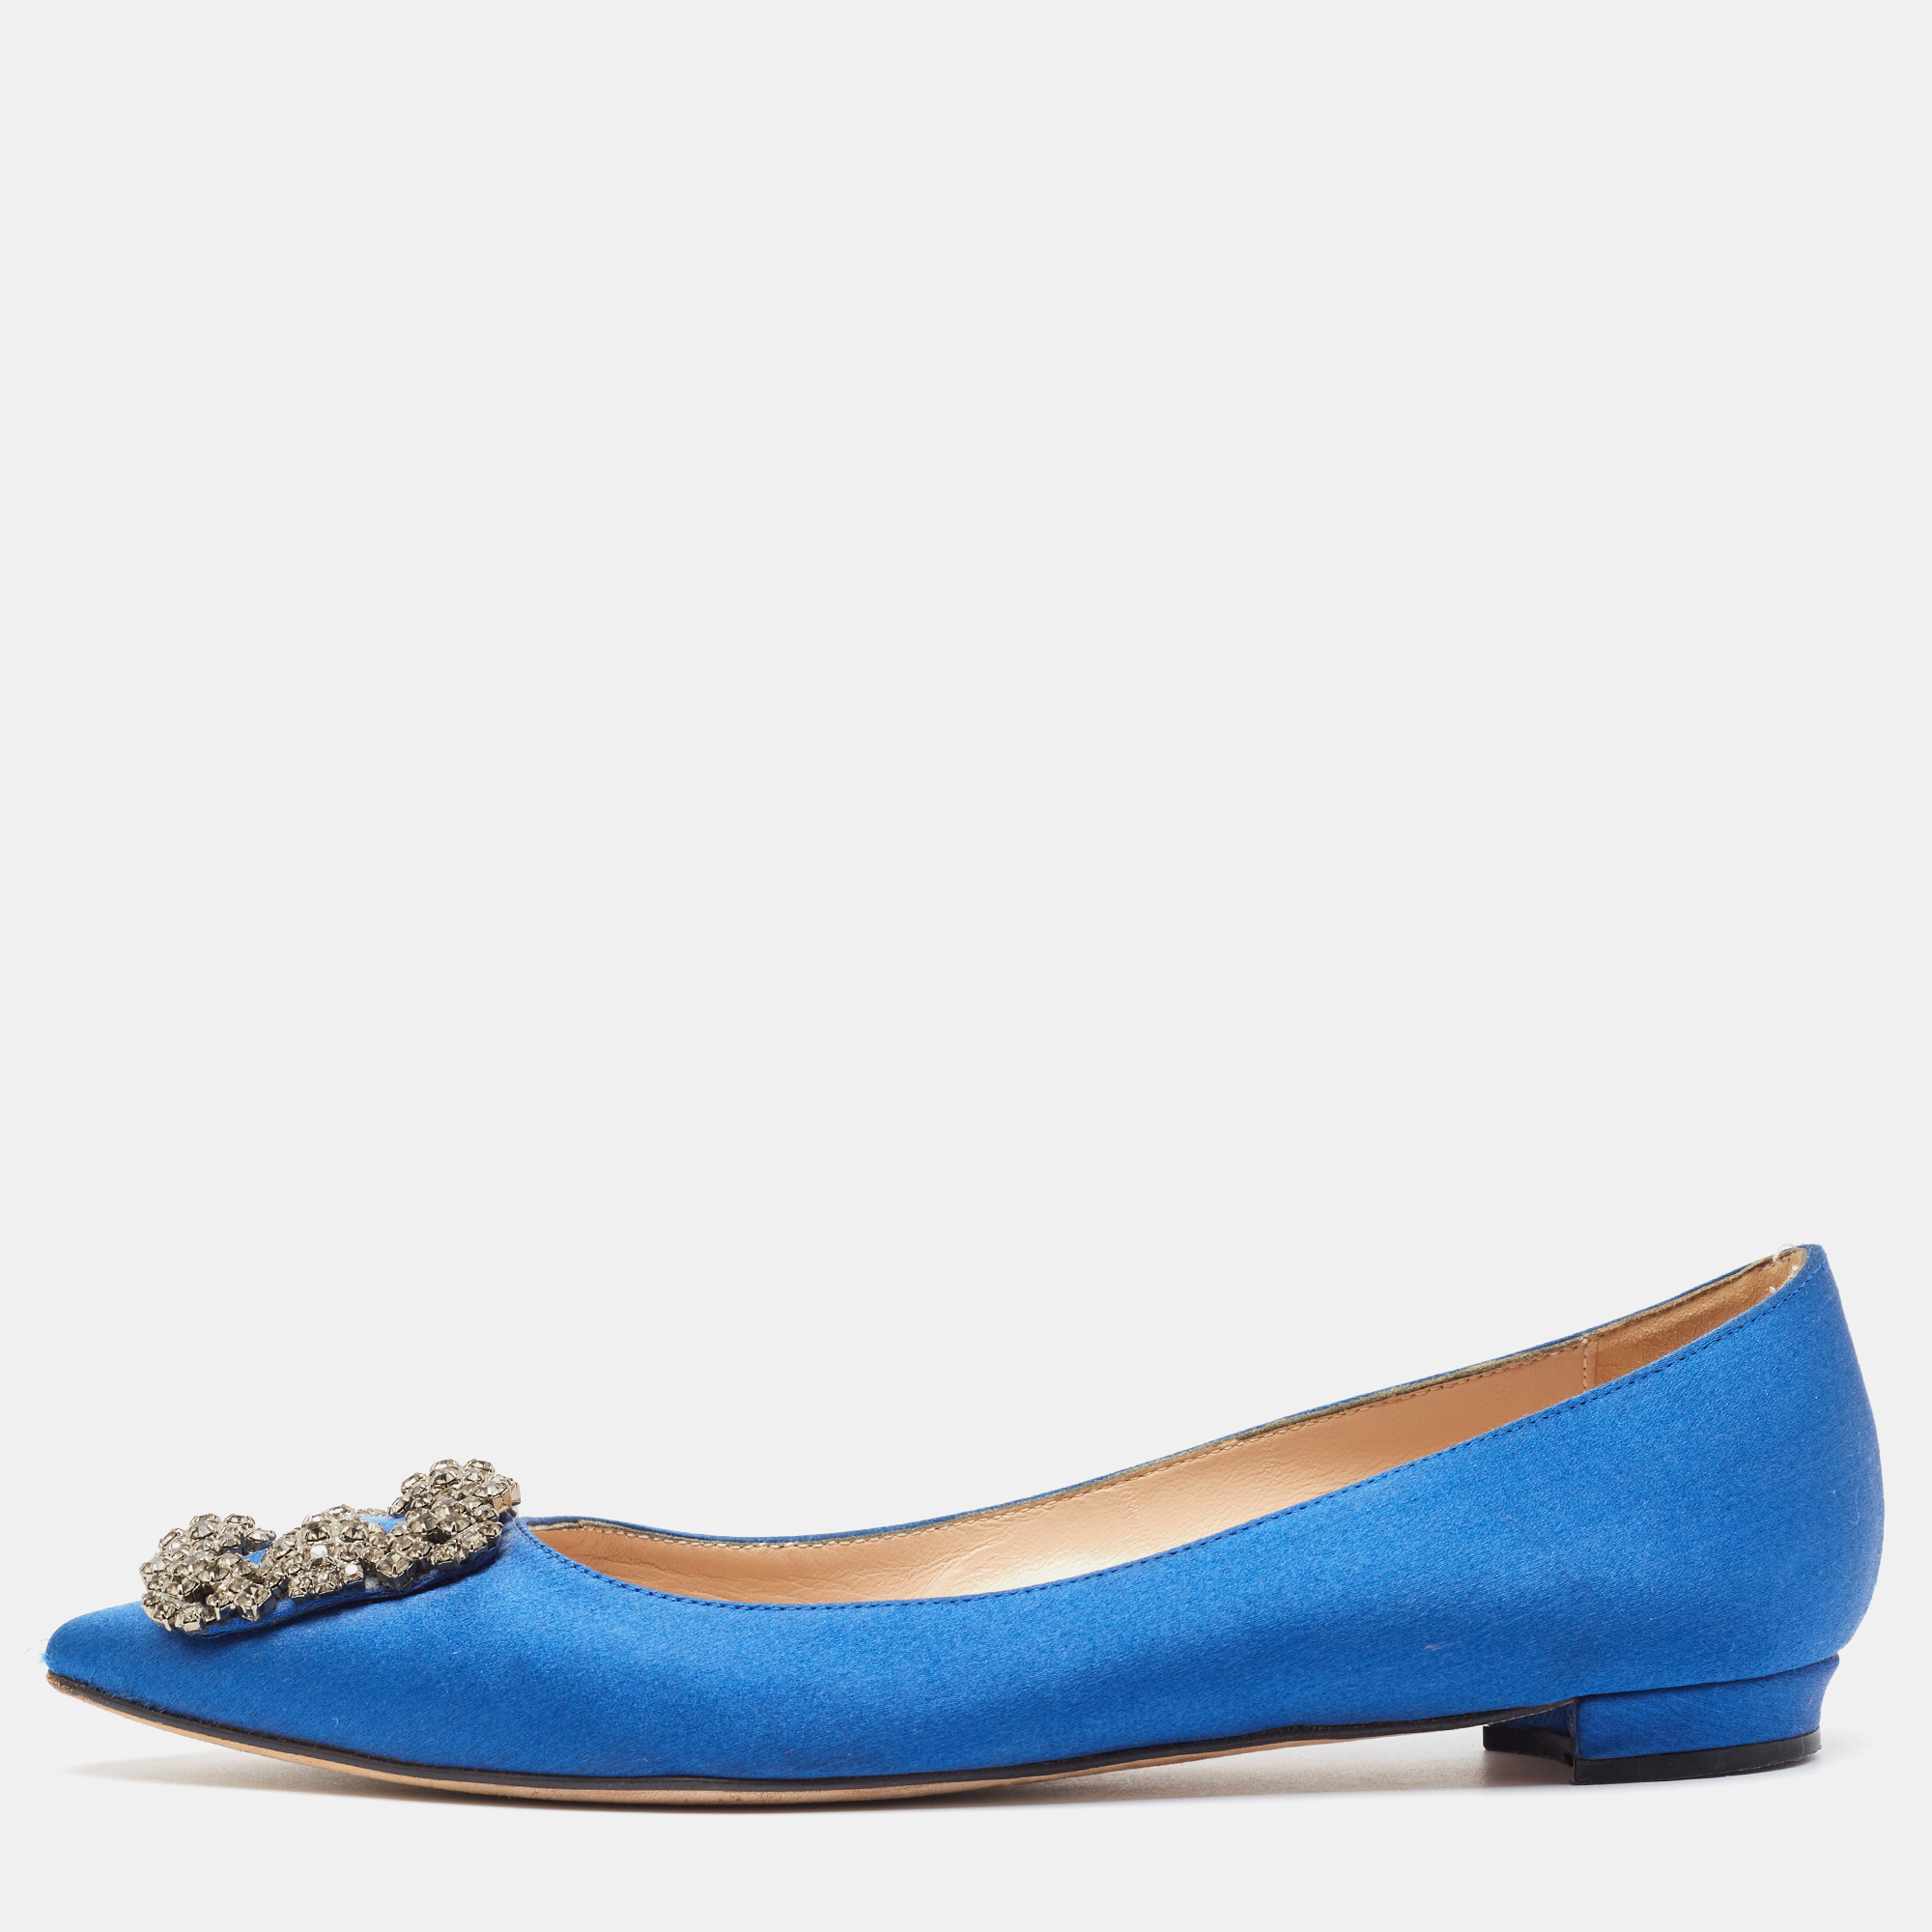 Pre-owned Manolo Blahnik Blue Satin Hangisi Flats Size 37